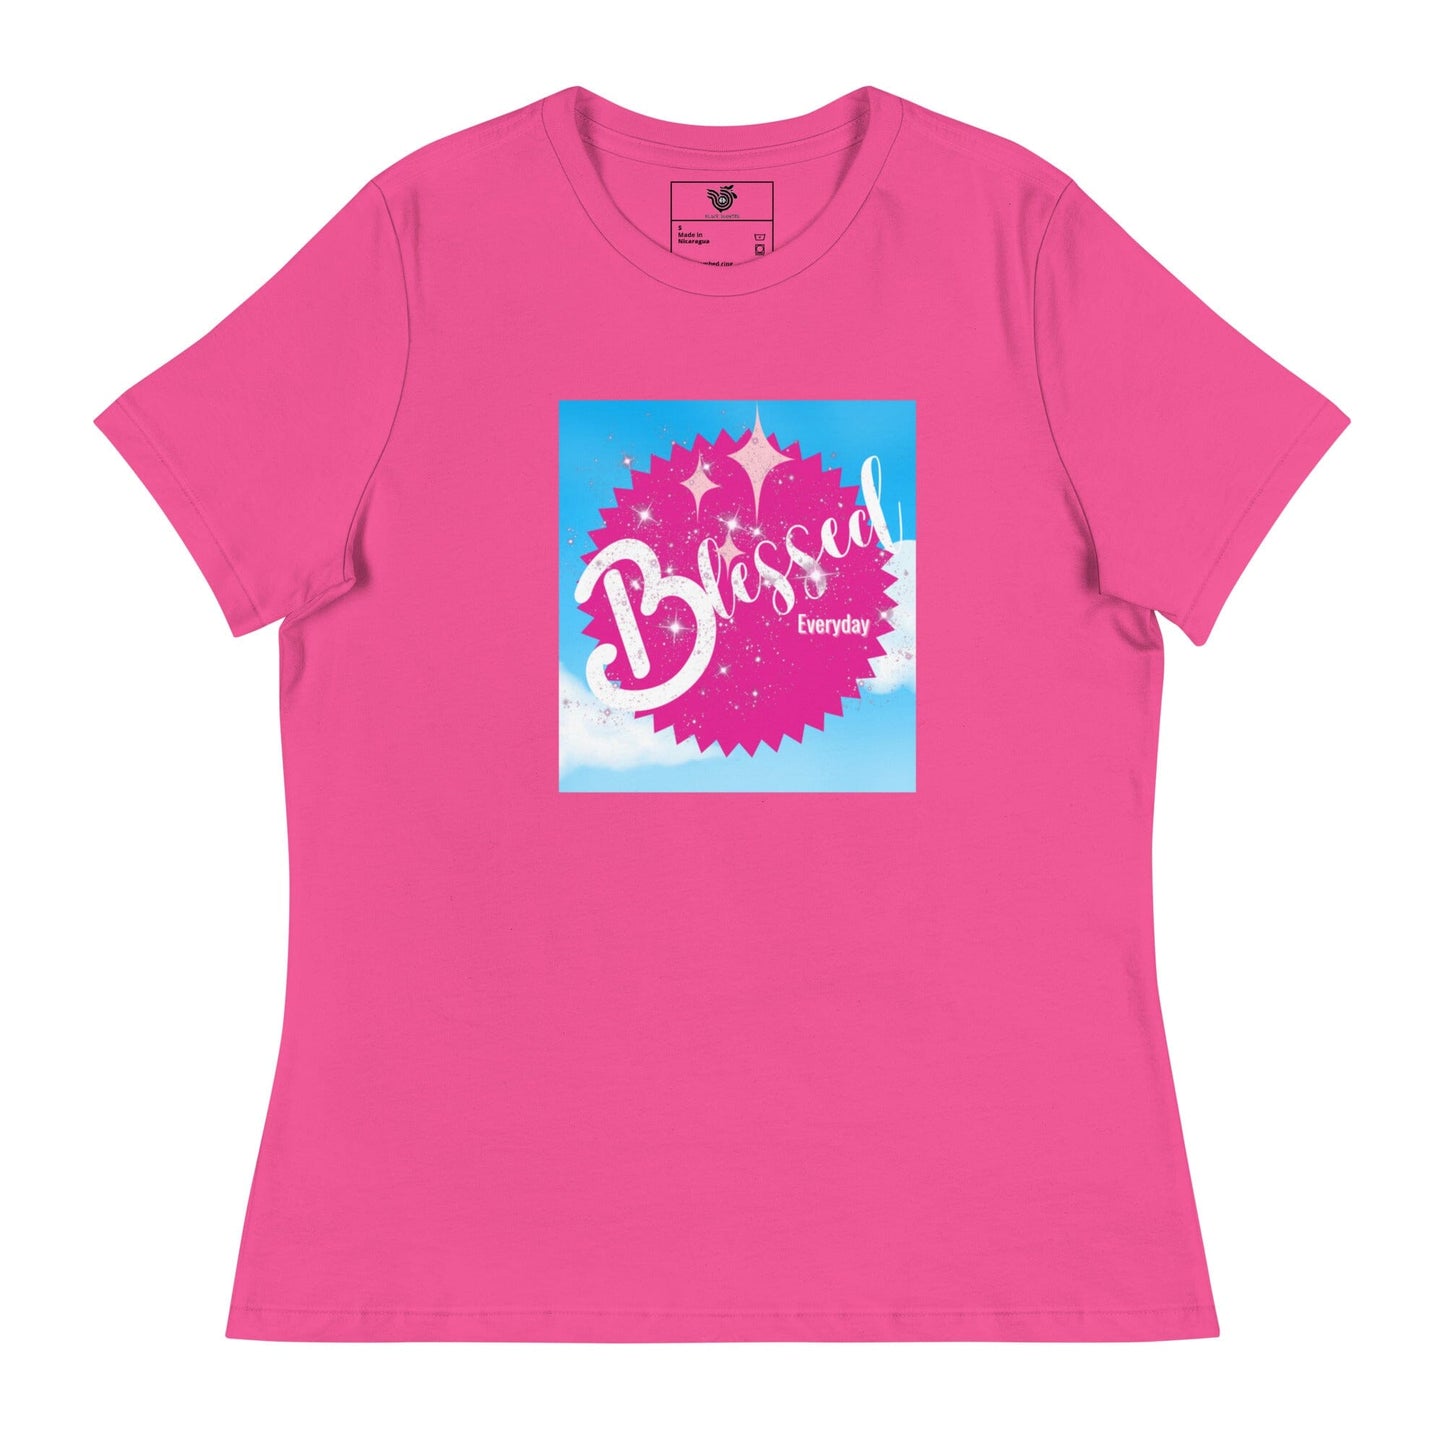 Blessed women's relaxed t-shirt